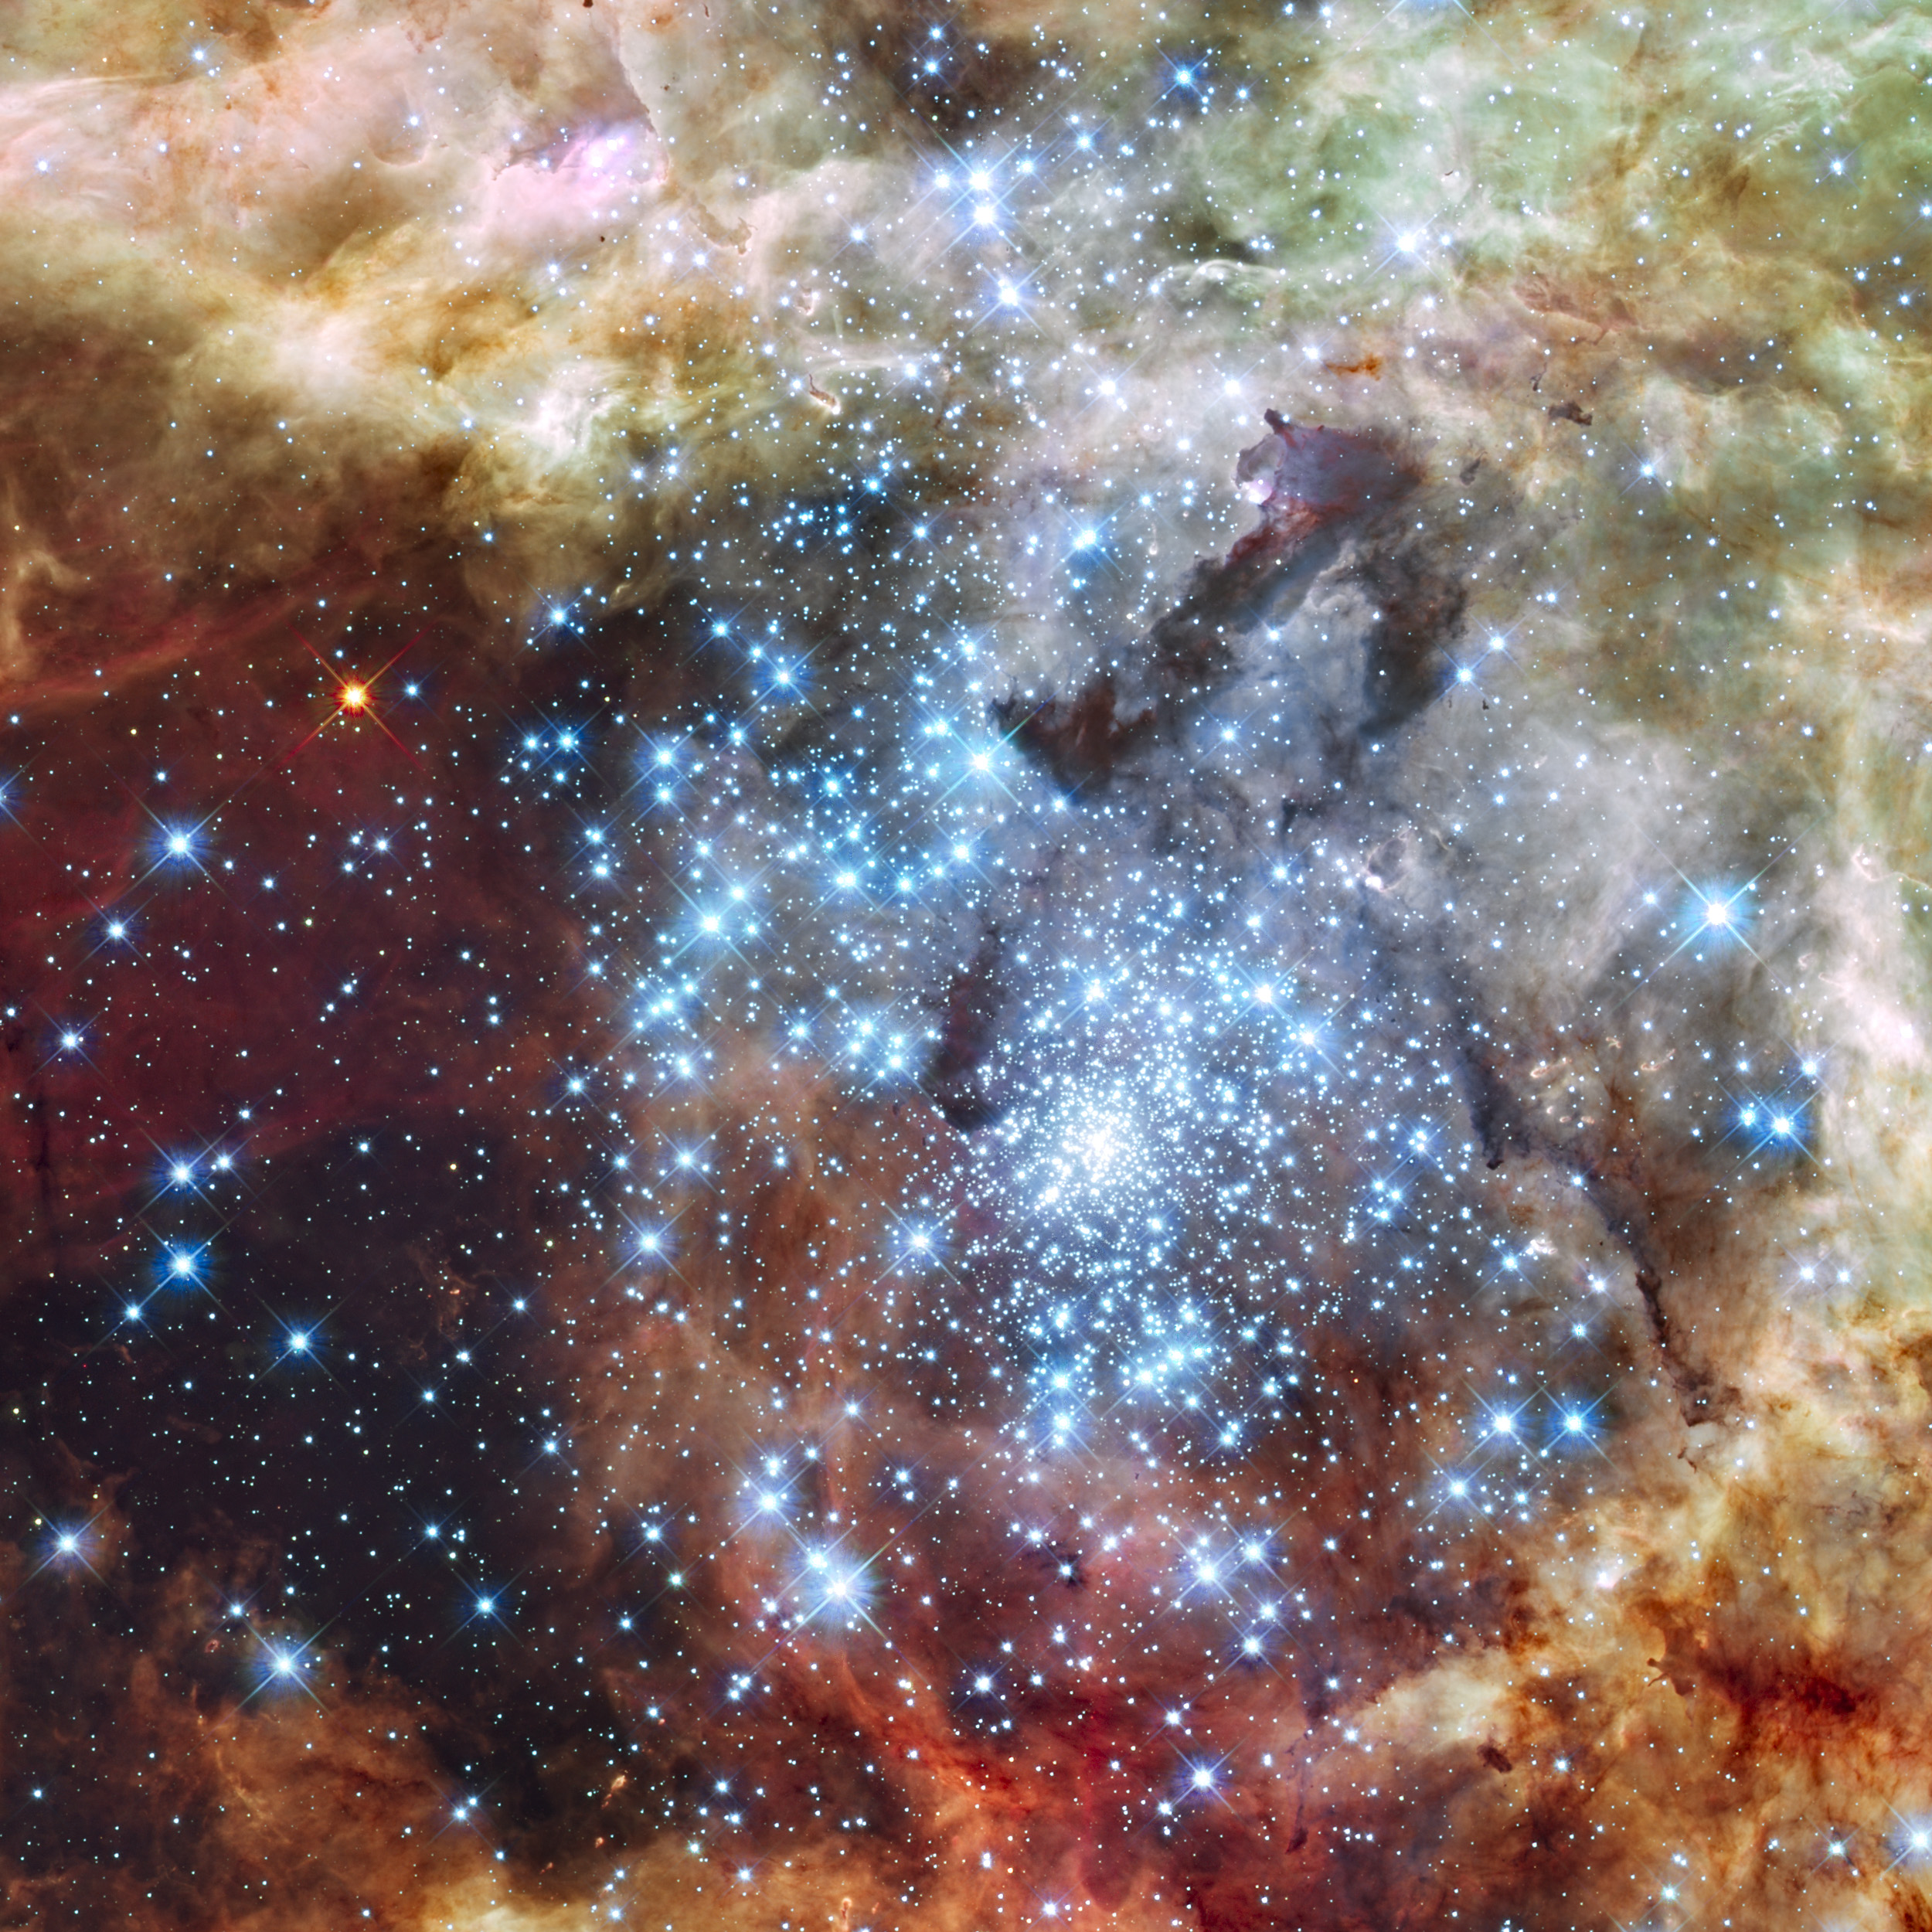 A James Webb Space Telescope image of the nebula 30 Doradus, a turbulent star-forming region in the Large Magellanic Cloud